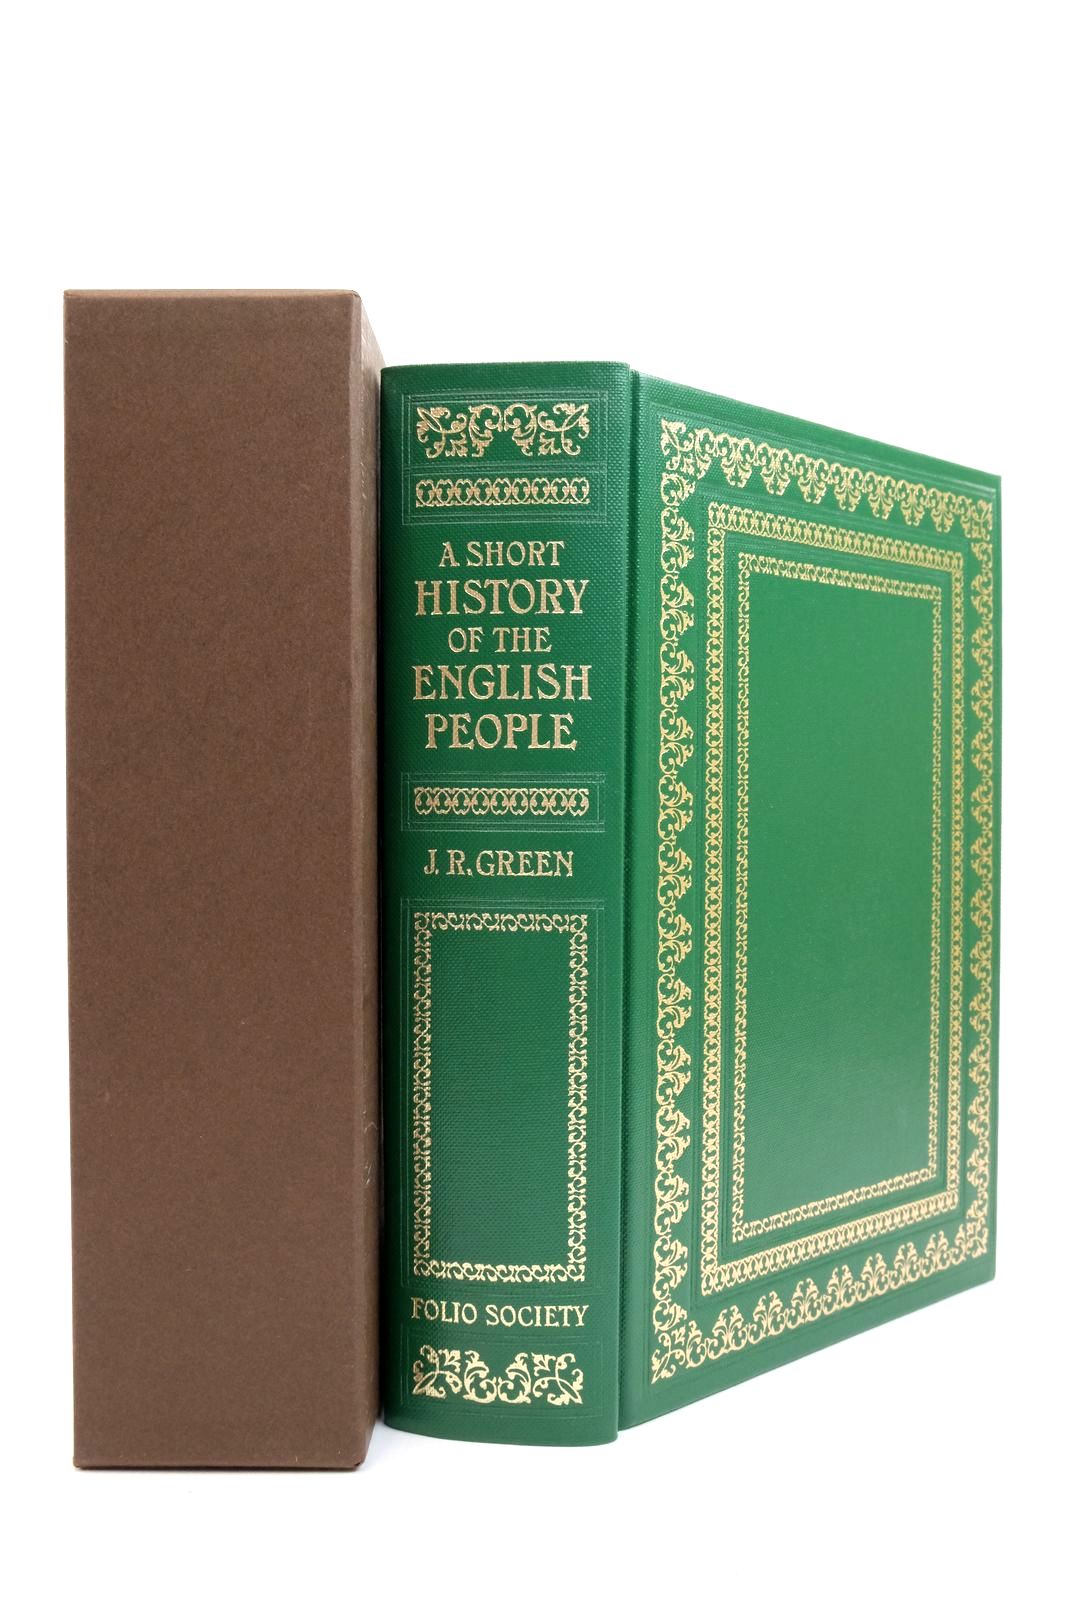 Photo of A SHORT HISTORY OF THE ENGLISH PEOPLE written by Green, John Richard
Hudson, Roger published by Folio Society (STOCK CODE: 2138249)  for sale by Stella & Rose's Books